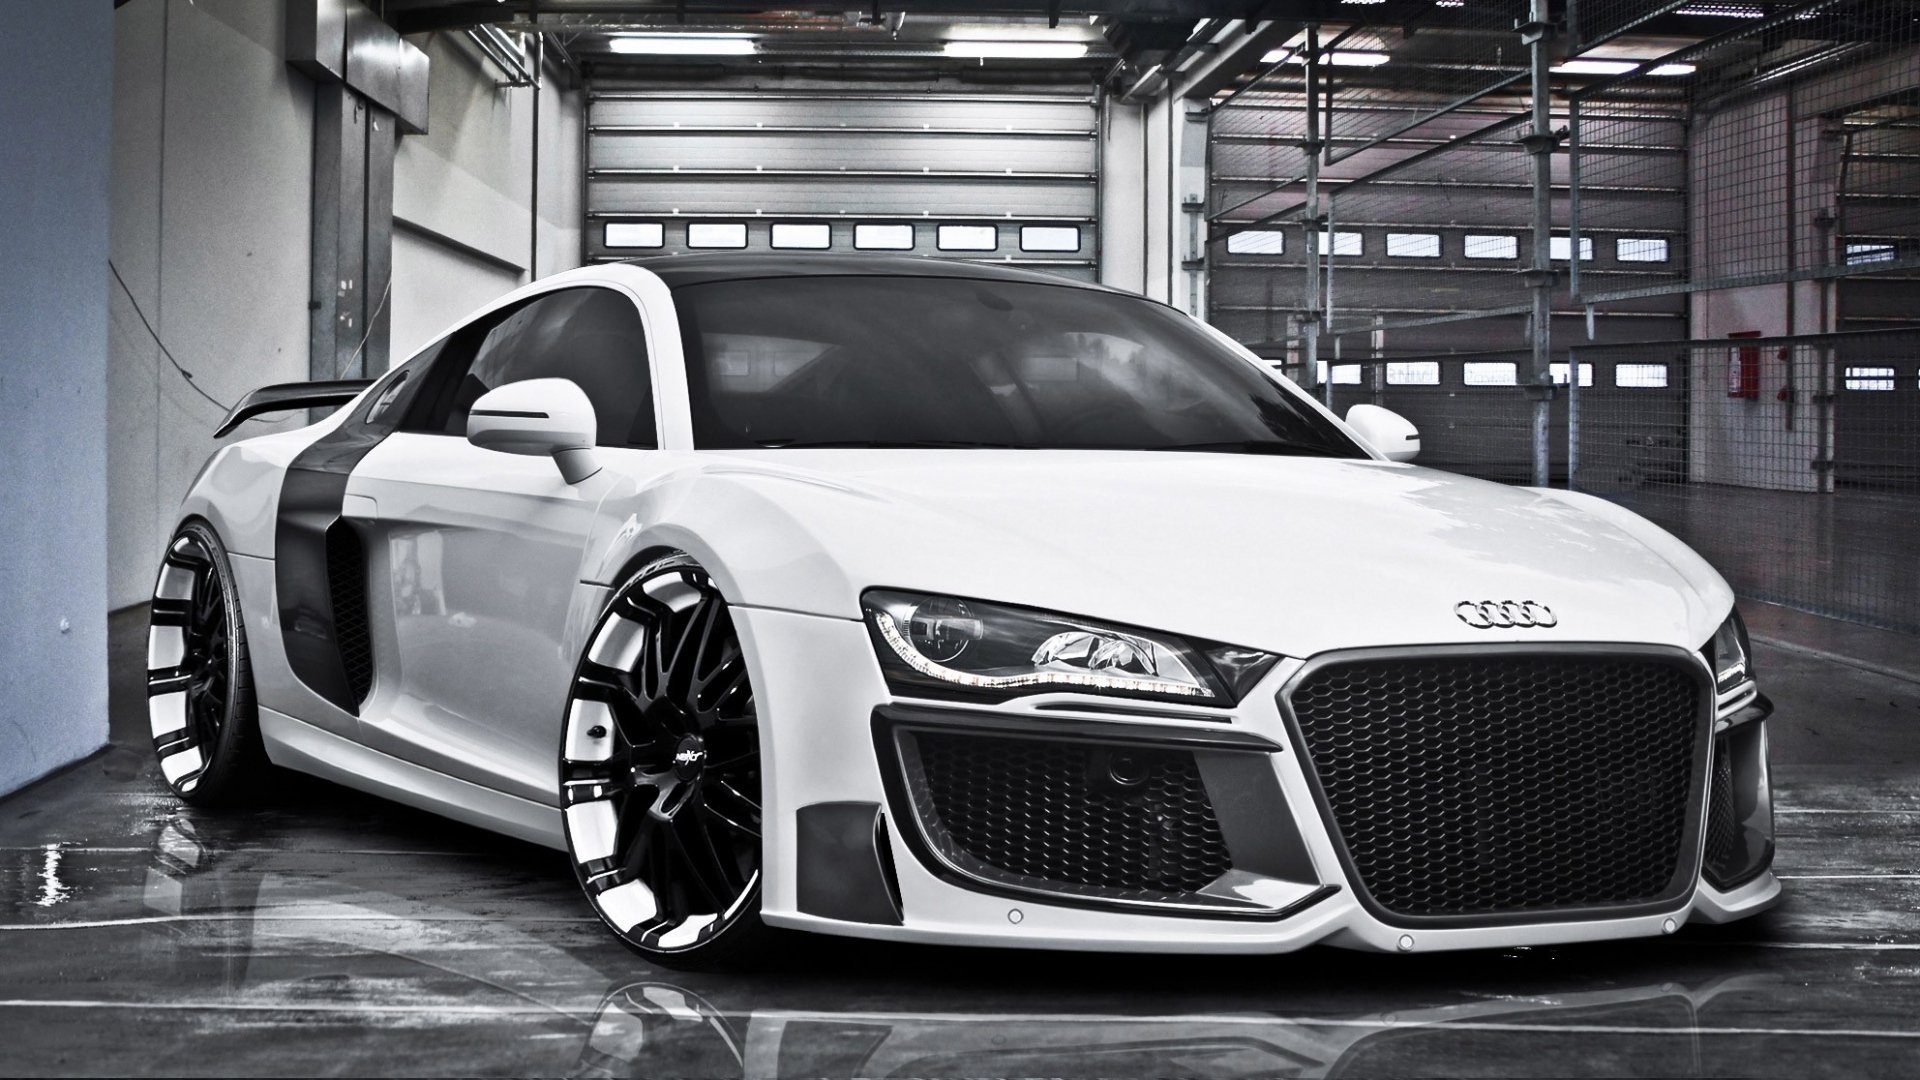 Audi White Audi R8 Wallpapers Hd Desktop And Mobile Backgrounds